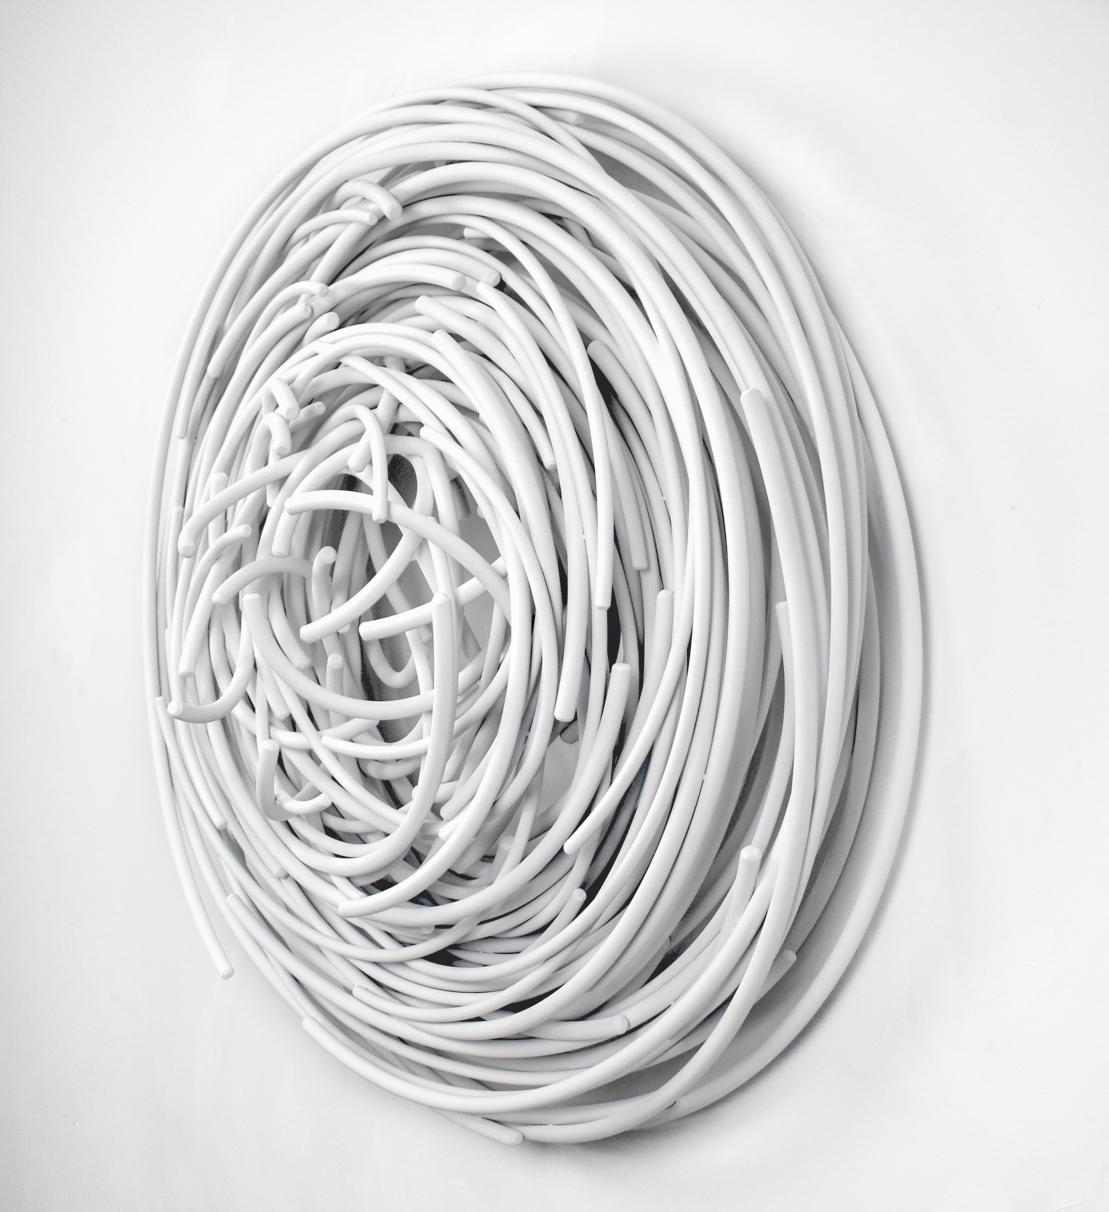 Maelstrom Series No 6 - layered, intersecting, forged aluminum wall sculpture - Sculpture by Shayne Dark